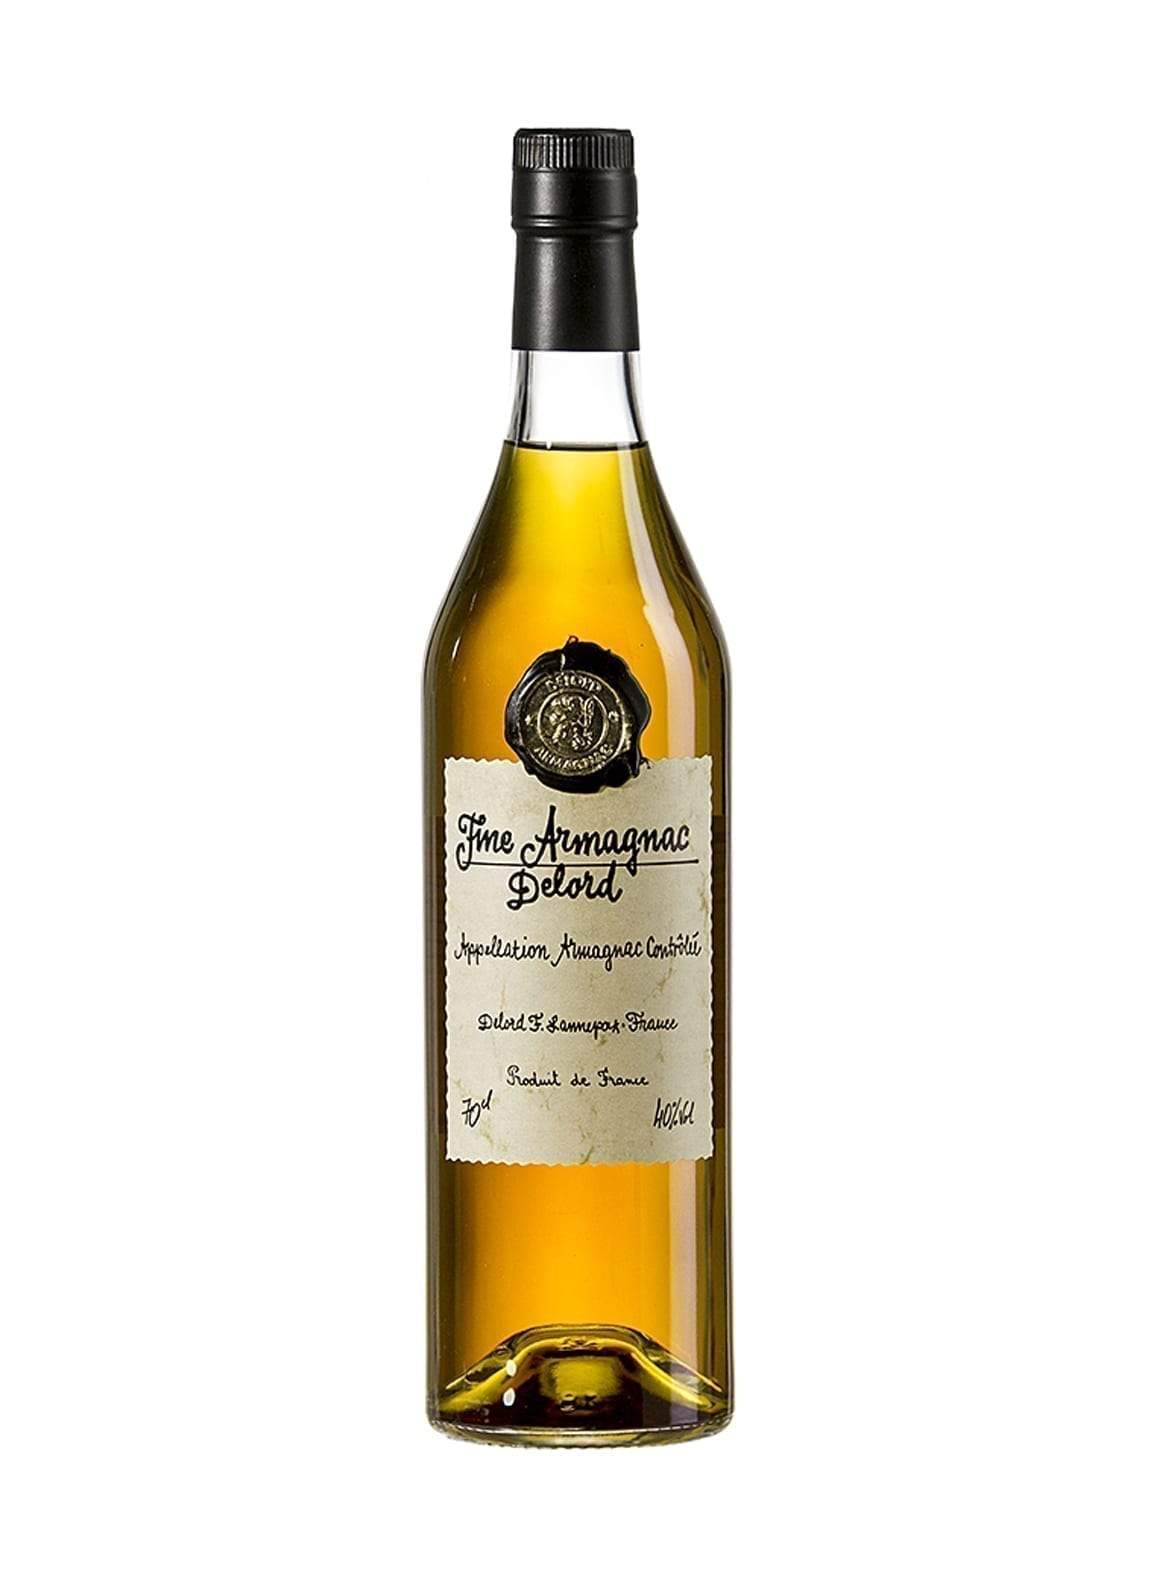 Delord Bas Armagnac Fine 2-3 years 40% 700ml | Brandy | Shop online at Spirits of France